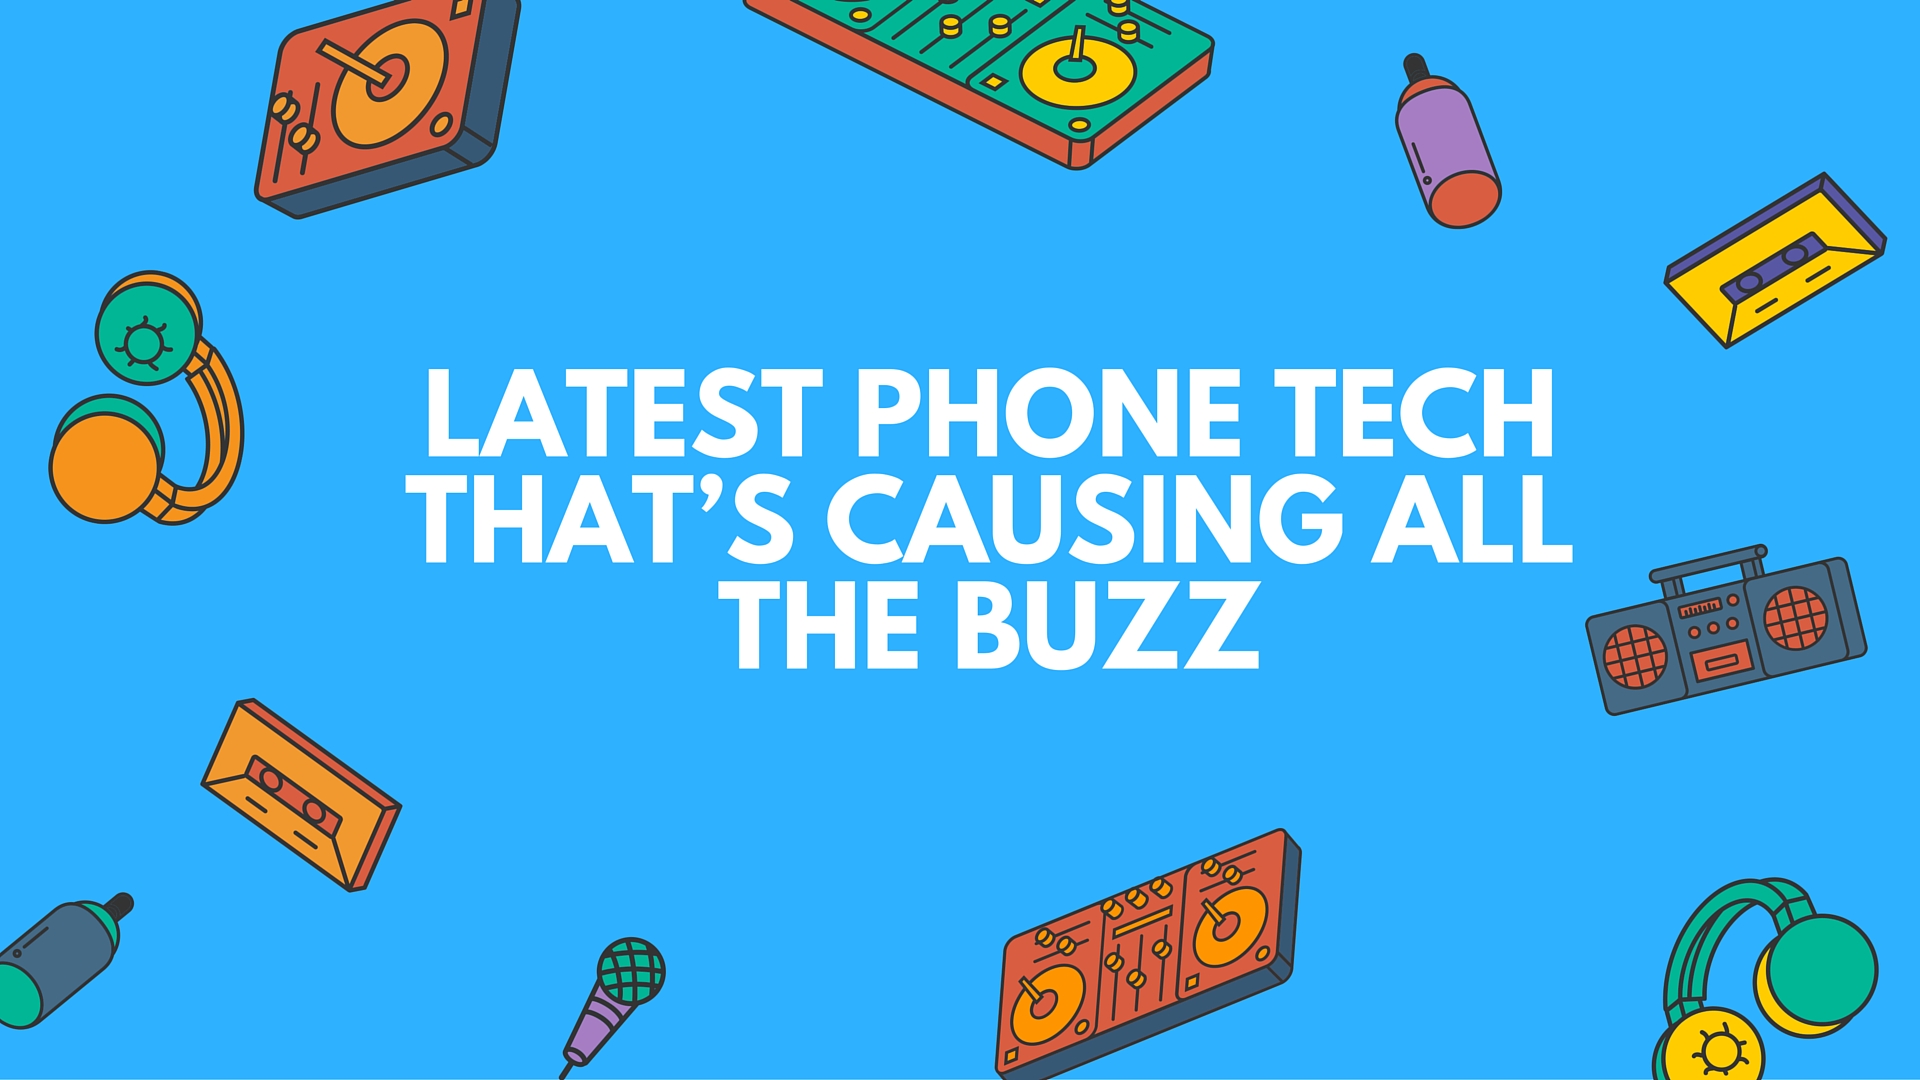 Latest Phone Tech That’s Causing All the Buzz